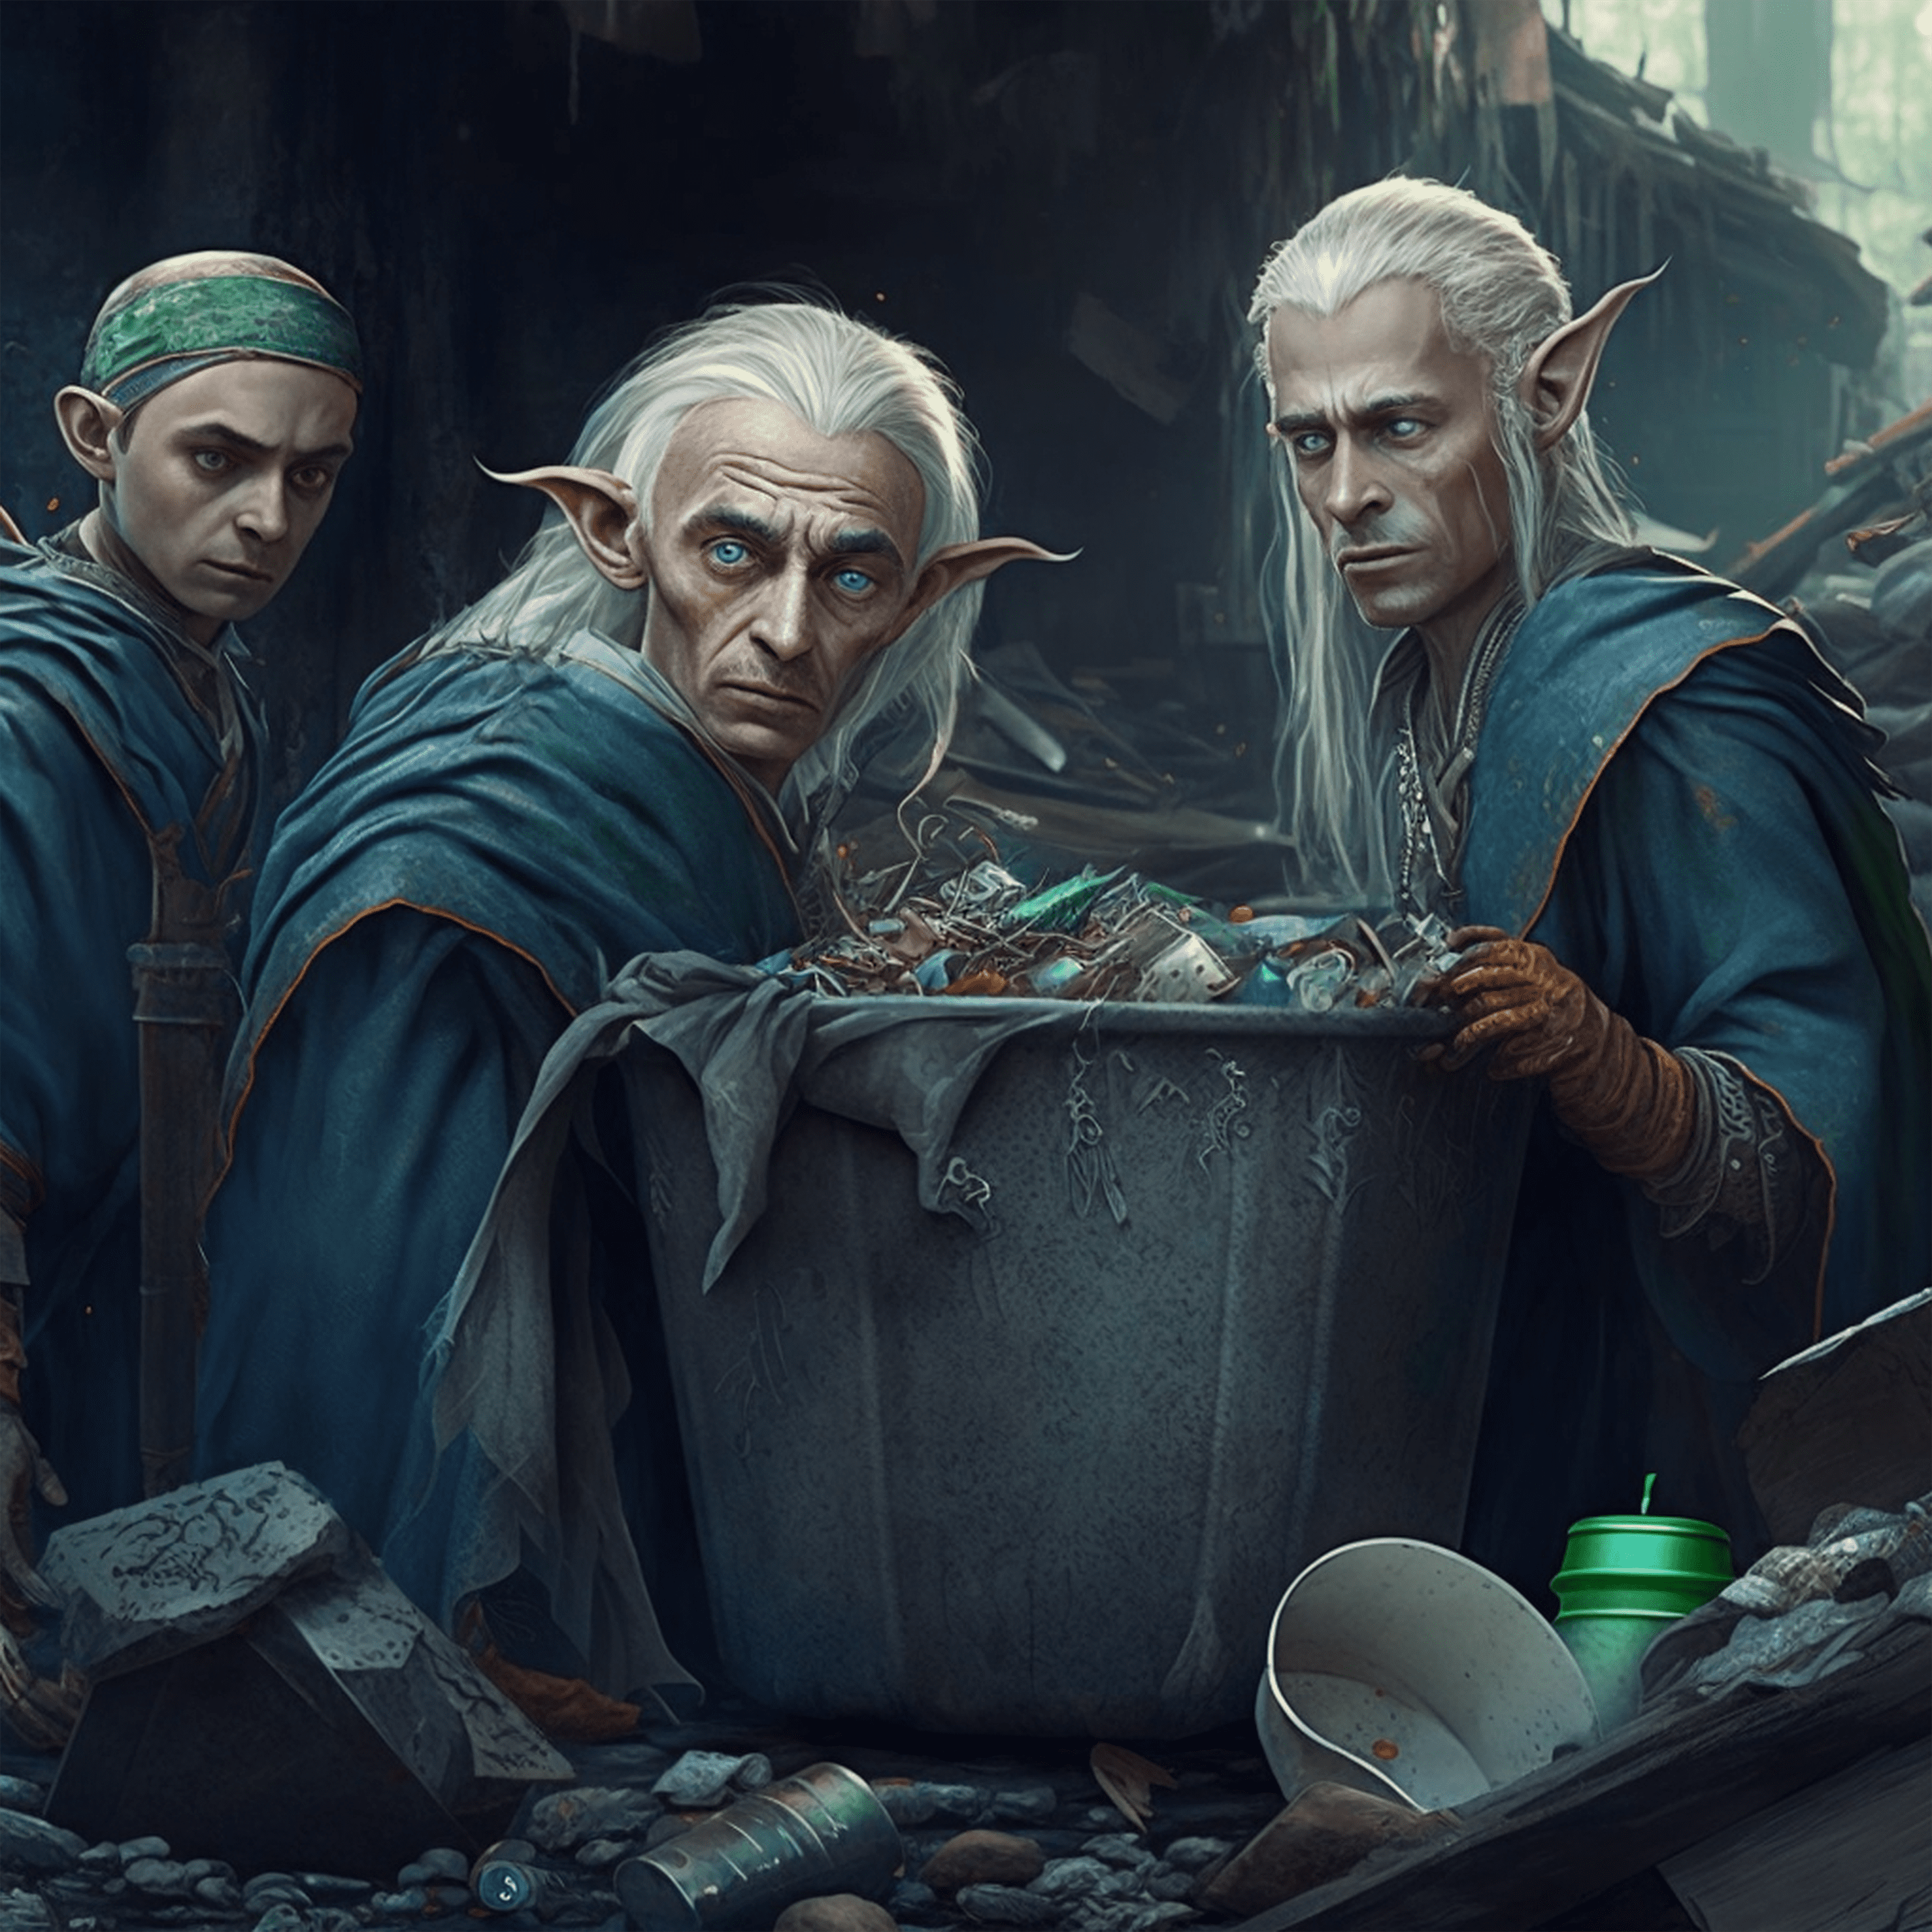 images/smmk_lord_of_rings_elves_picking_through_trash_fa3e4f3e-7a31-4902-8d5a-bfa7a964bf40-0000.png